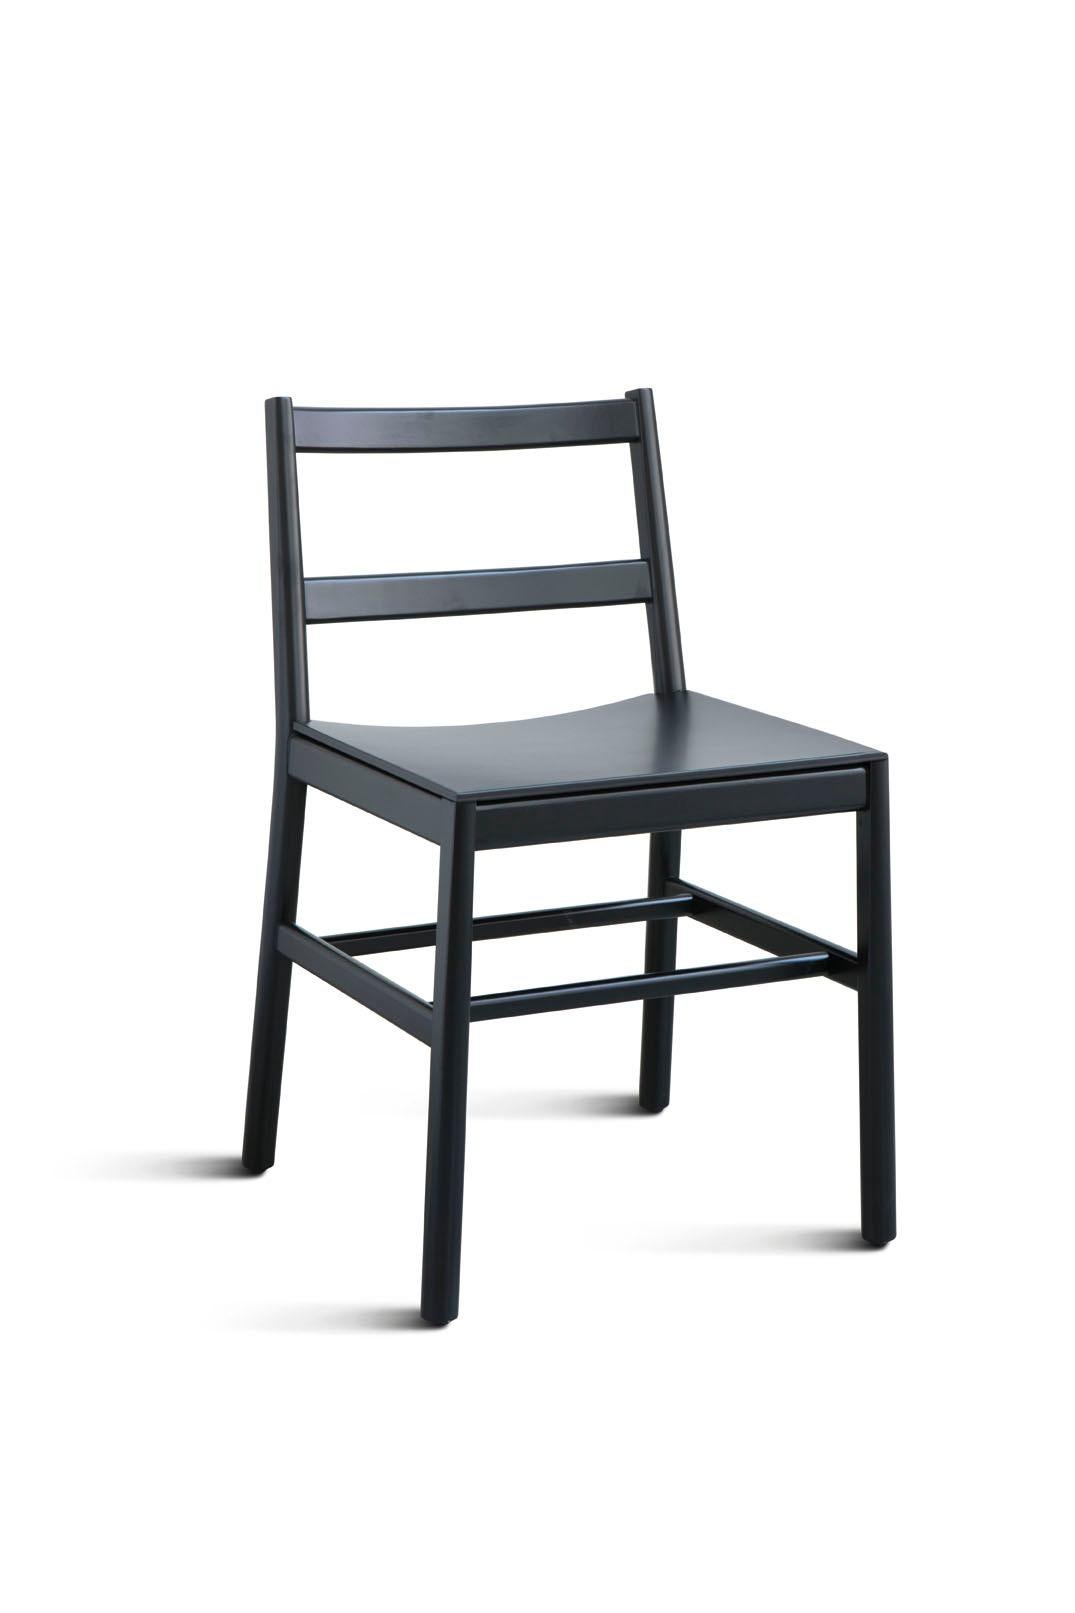 Chair Art, 0020-LE in Beechwood Painted and Wood Seat by Emilio Nanni For Sale 11